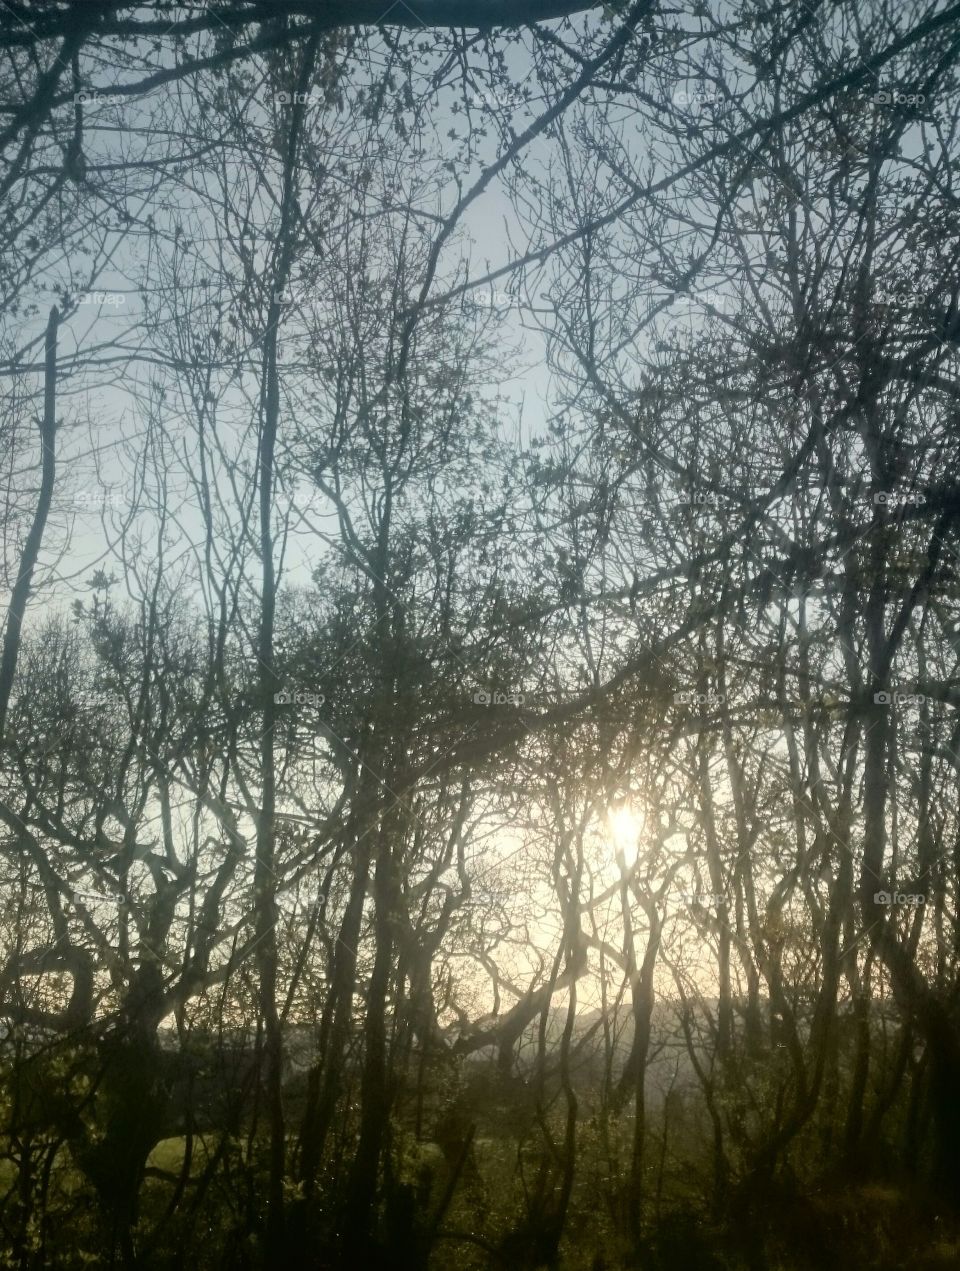 Another one of sun through trees in Jedburgh